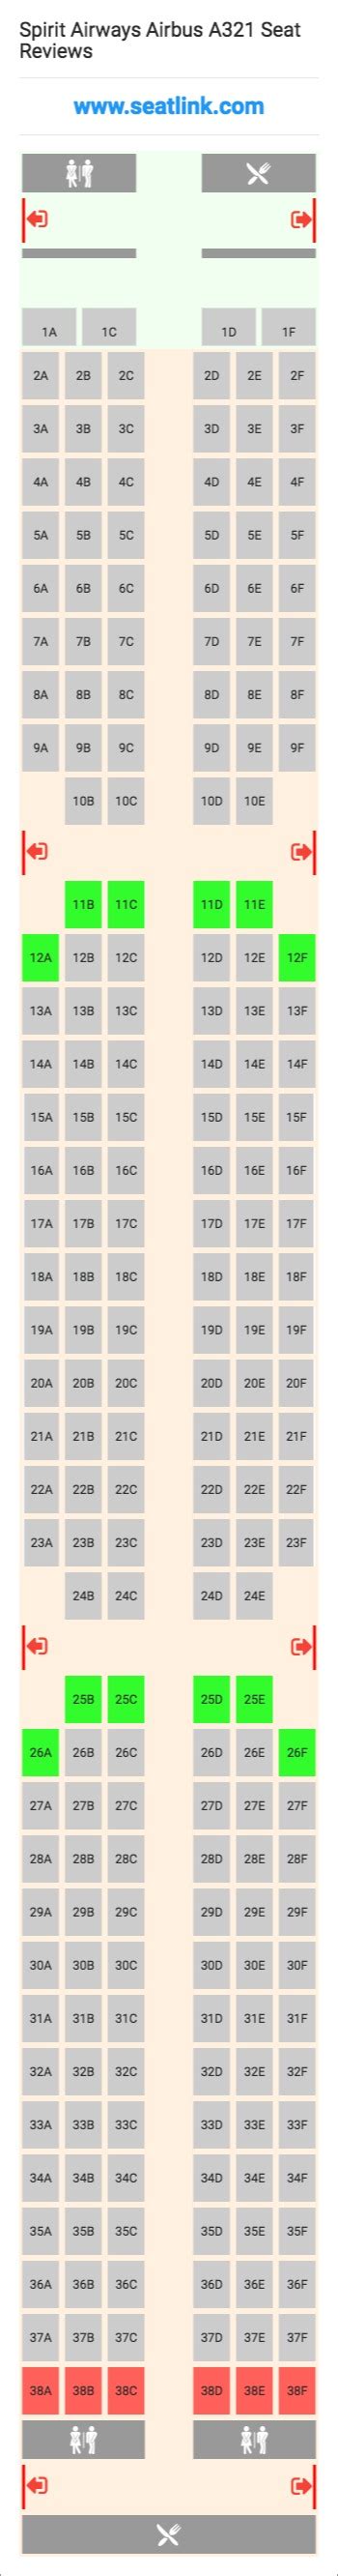 A321 Frontier Airlines Seating Chart